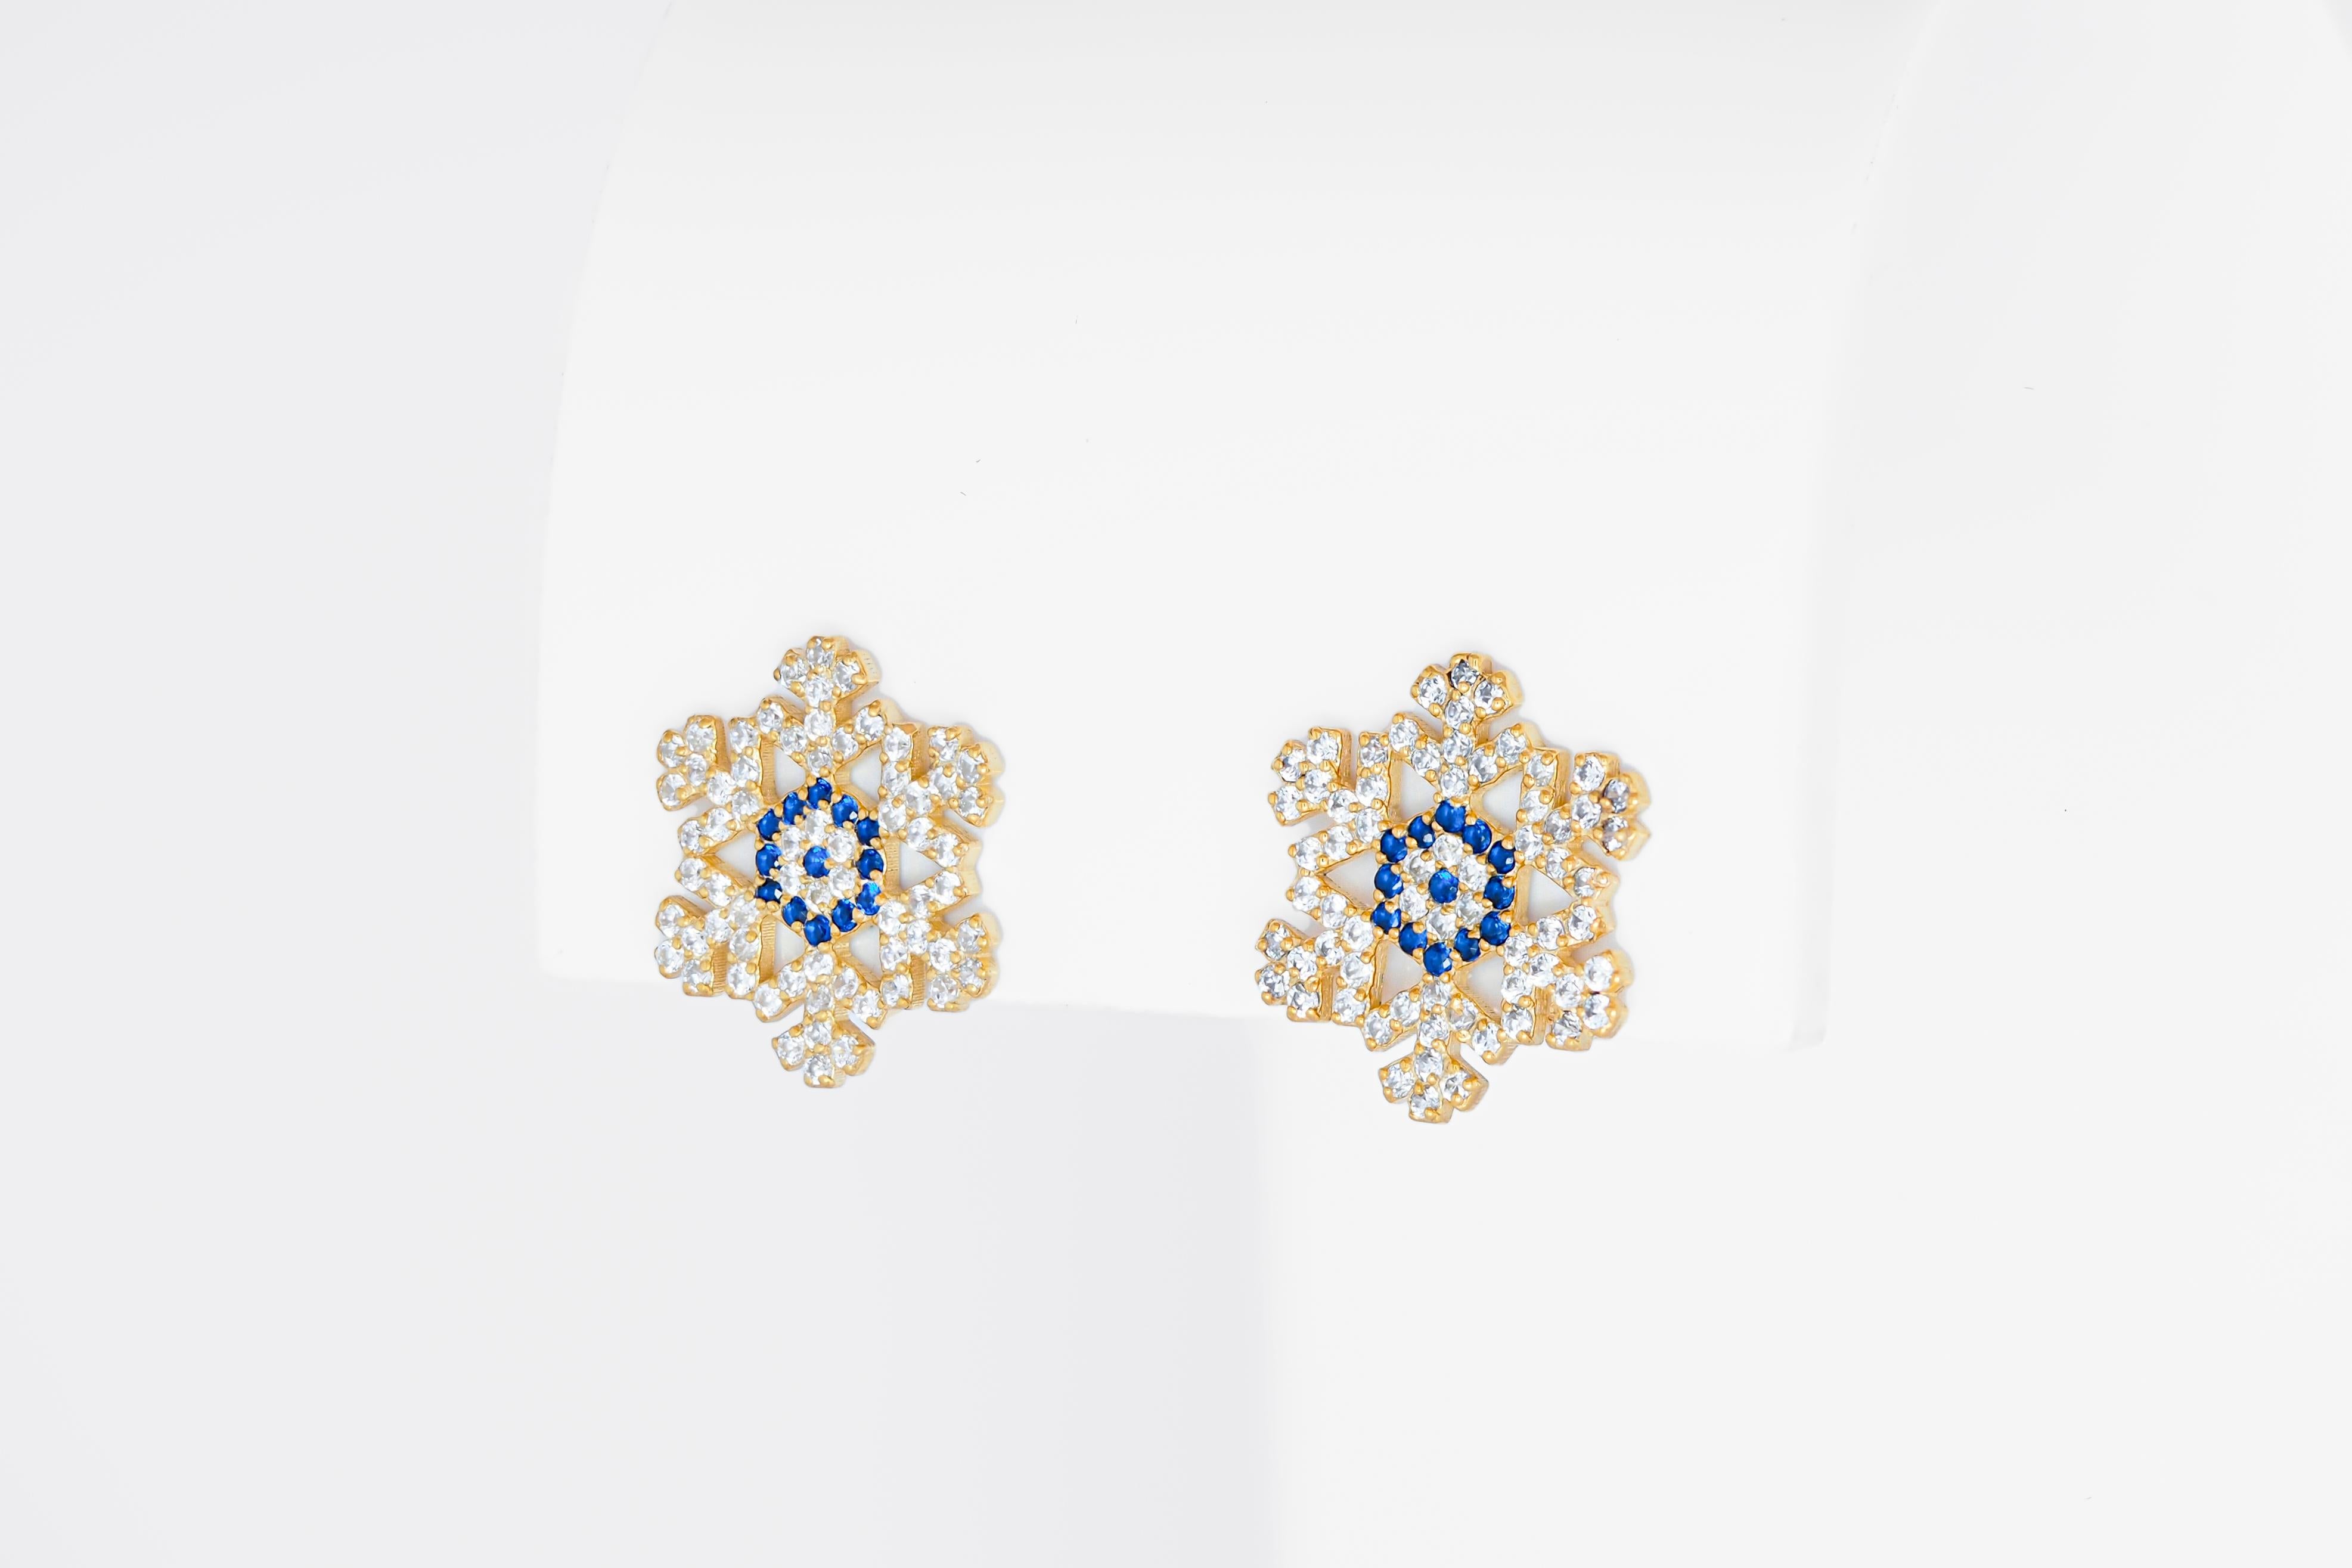 Snowflake 14k gold studs. 
Snow gold Earrings. Christmas Earrings Jewelry. Christmas Present for her. Sparkly gold Earrings. Christmas Tree gold studs. Santa Earrings.

Total weight: 2.2 g.
Metal: 14k solid gold
Gemstones: multicolor sapphires and